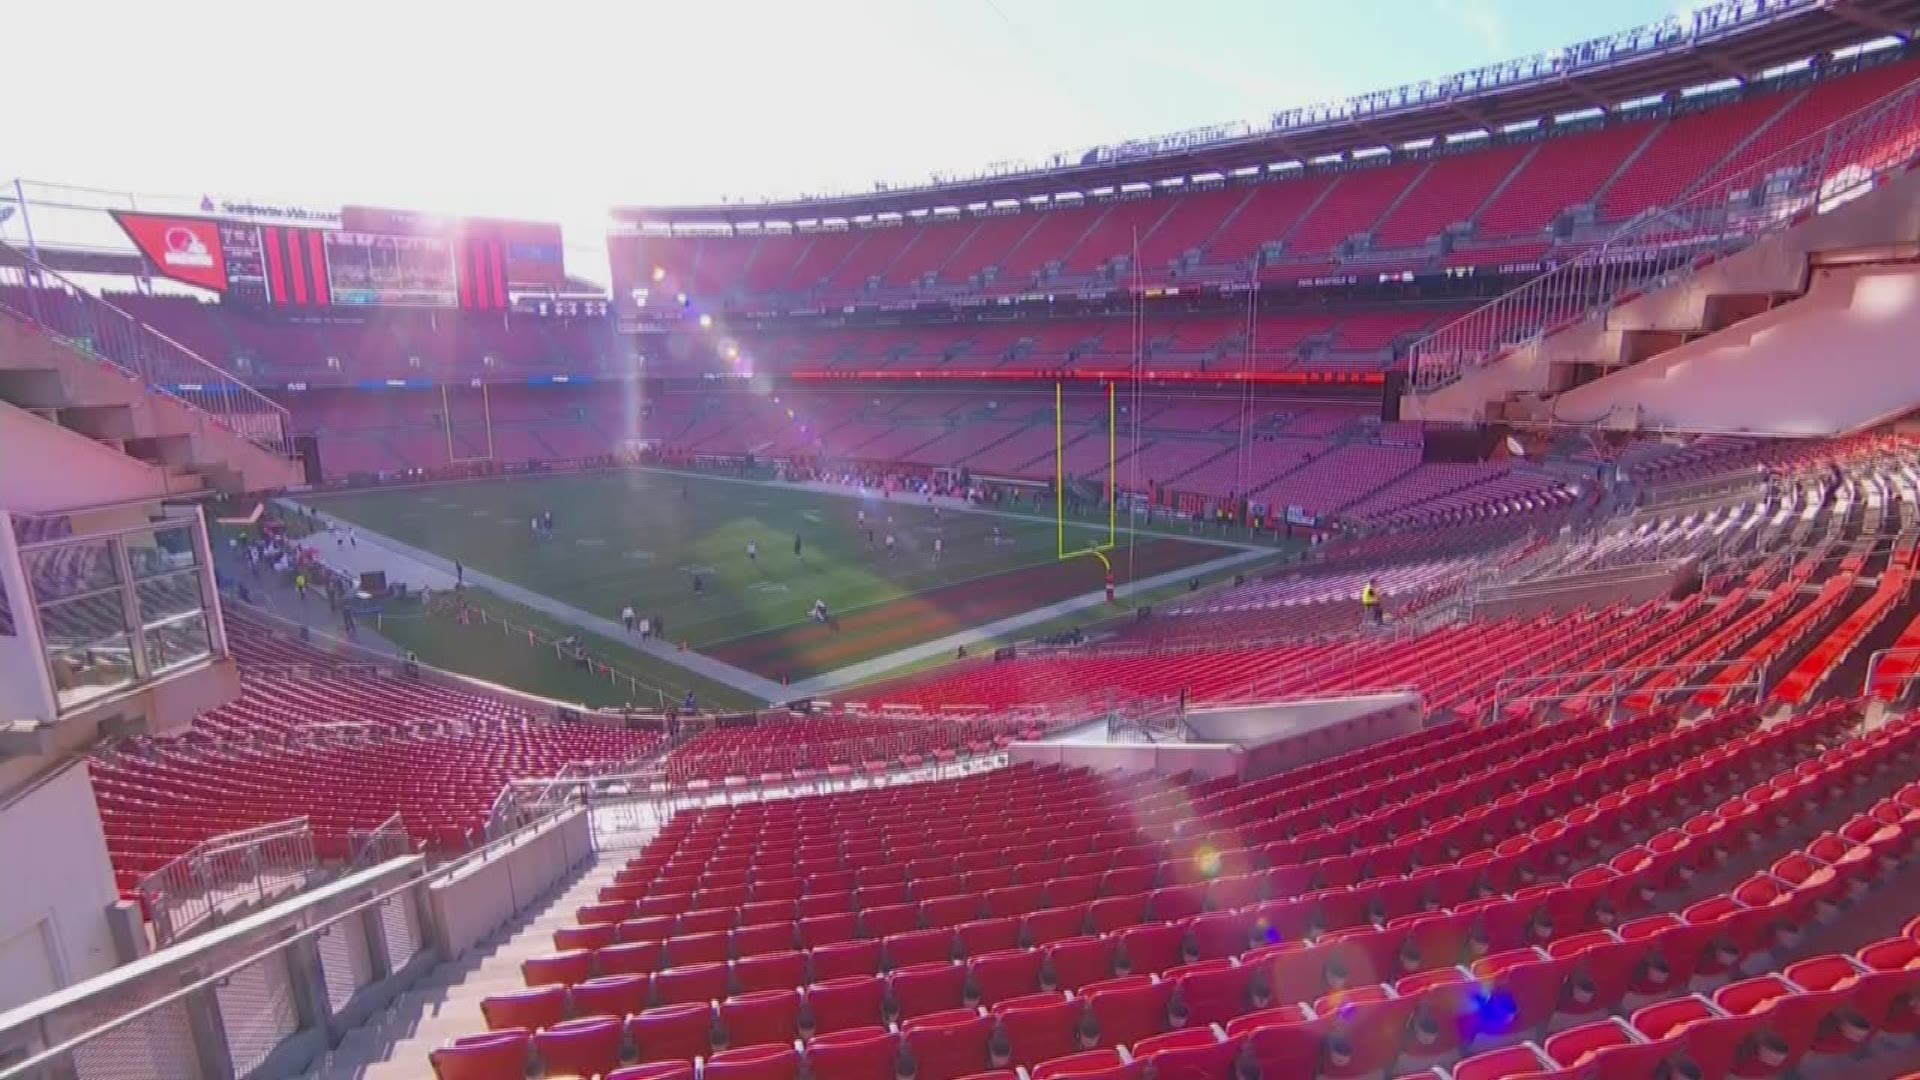 The stage is set at FirstEnergy Stadium as the Cleveland Browns prepare to host the Los Angeles Rams on Sunday Night Football. Kickoff on Channel 3 is set for 8:20p.